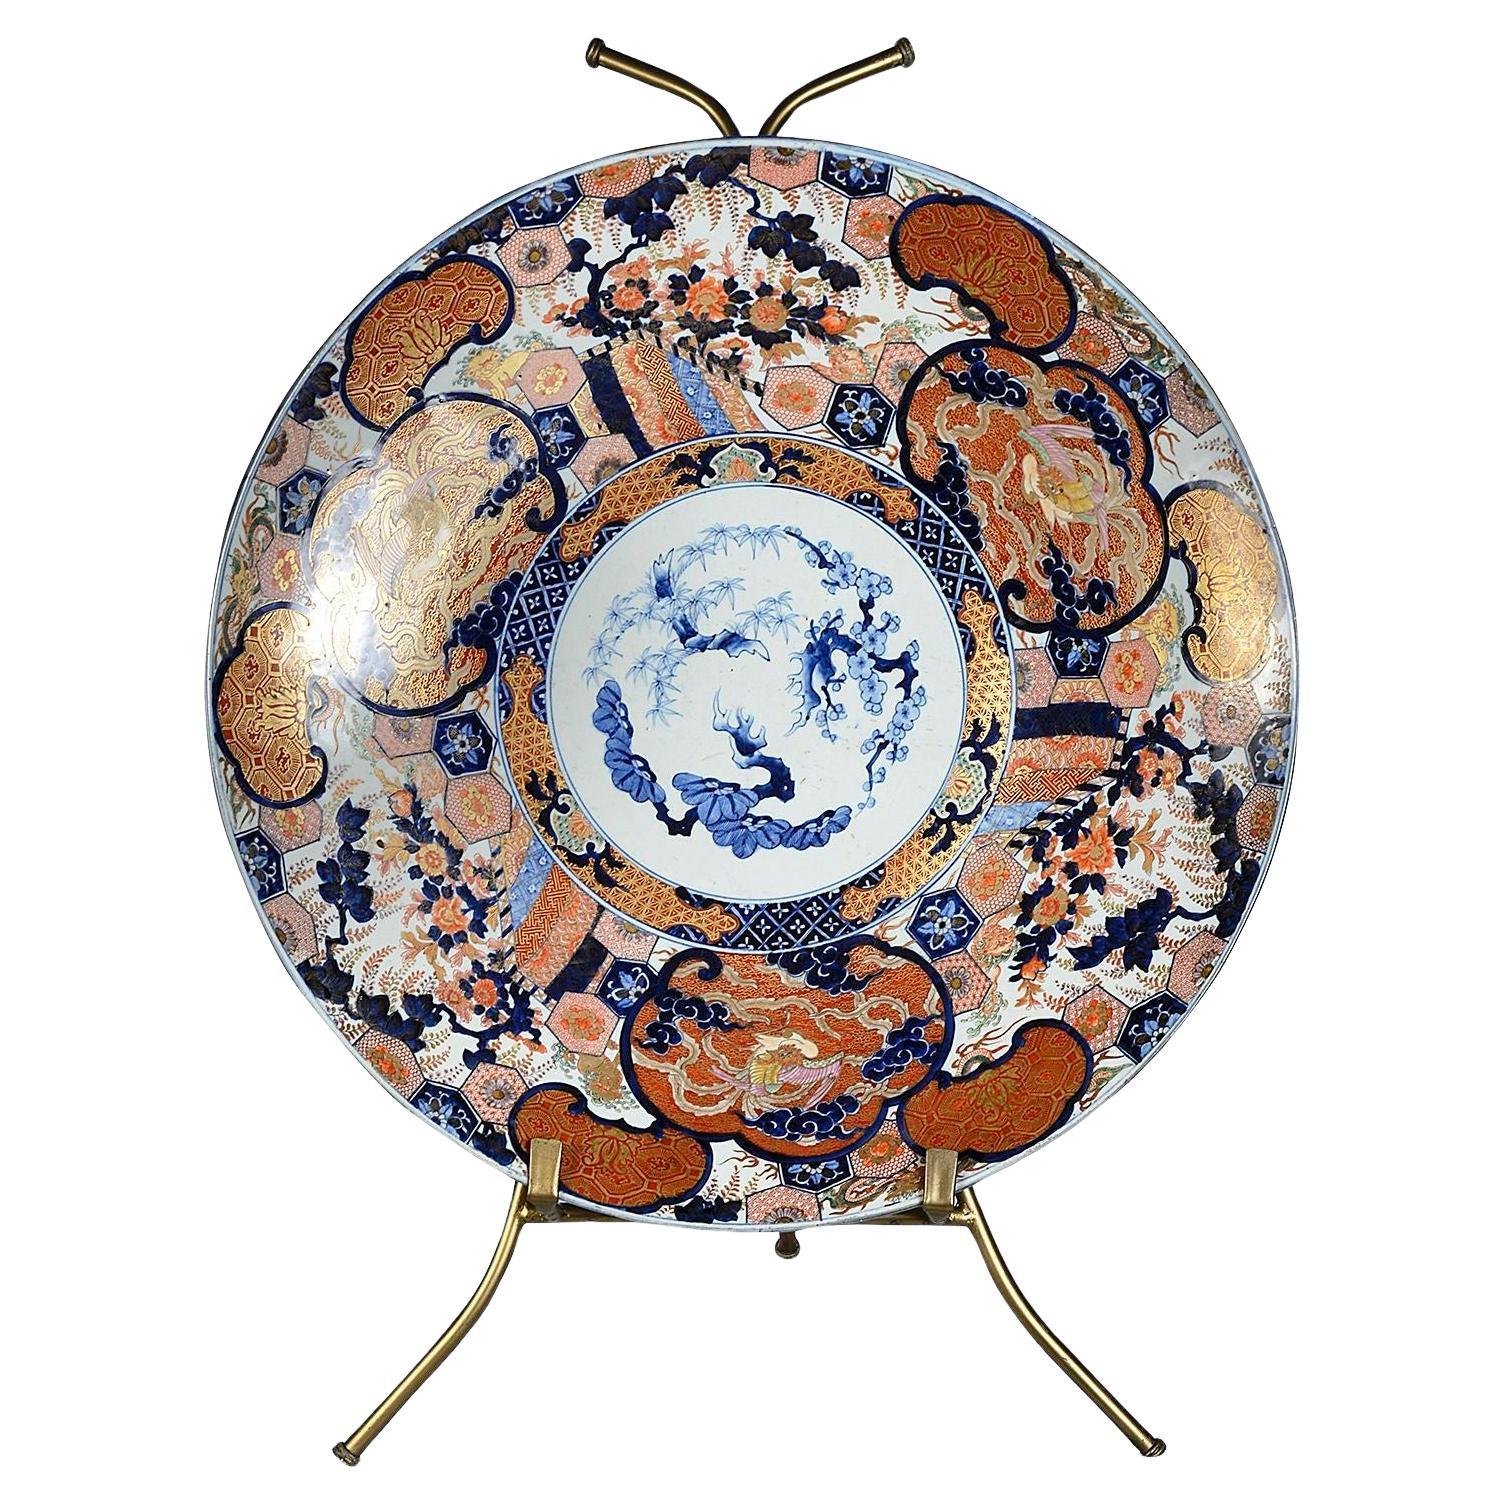 Is Japanese porcelain valuable?